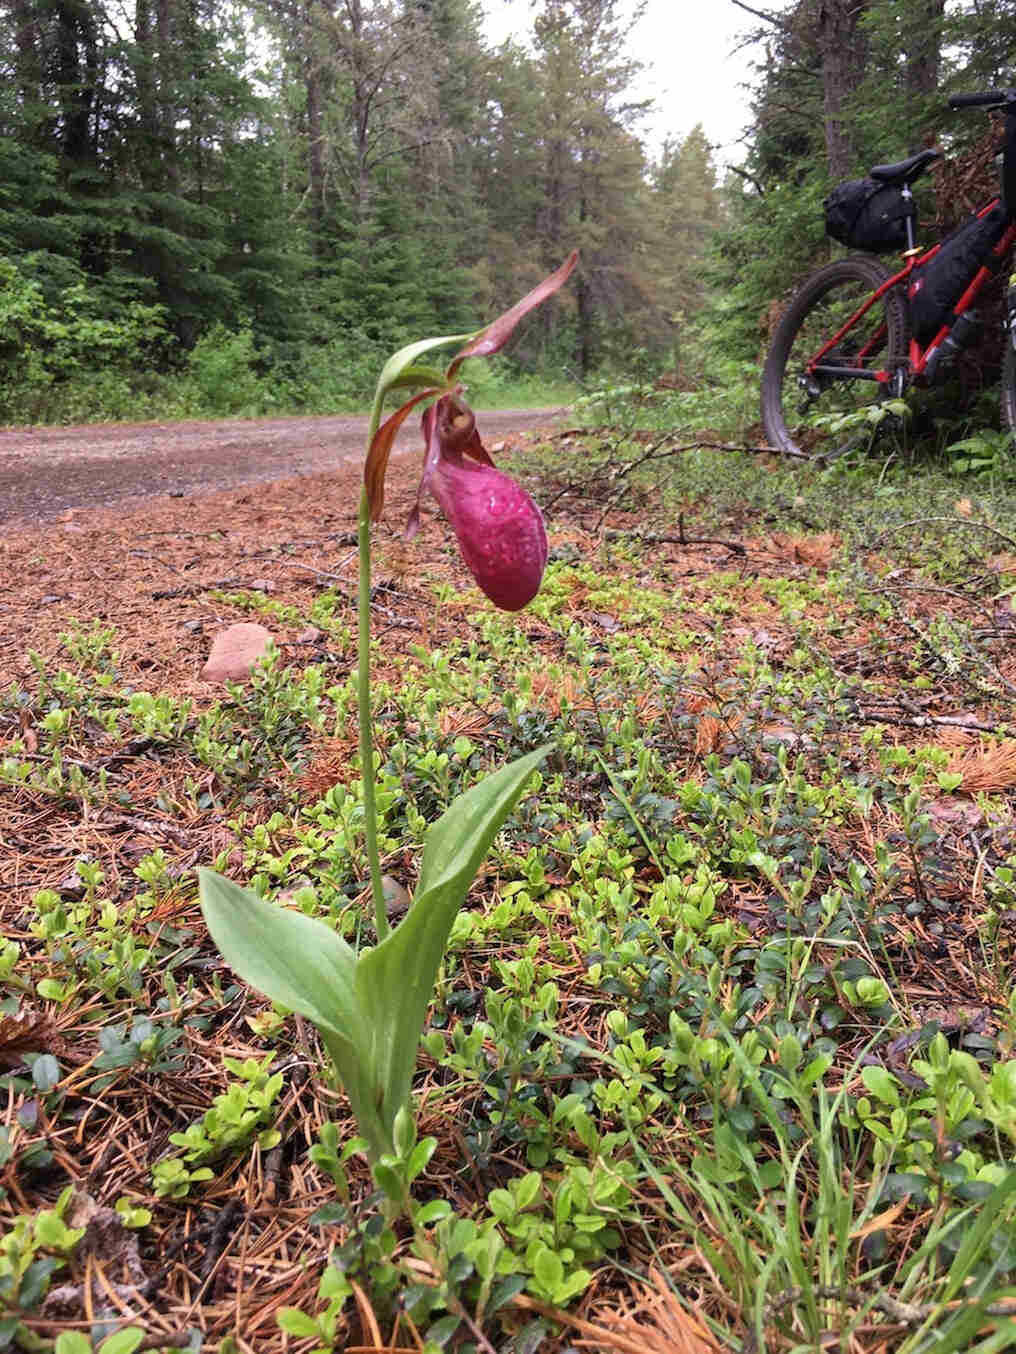 A wild orchid on the side of a gravel road, with a red Surly bike and Pine trees in the background 